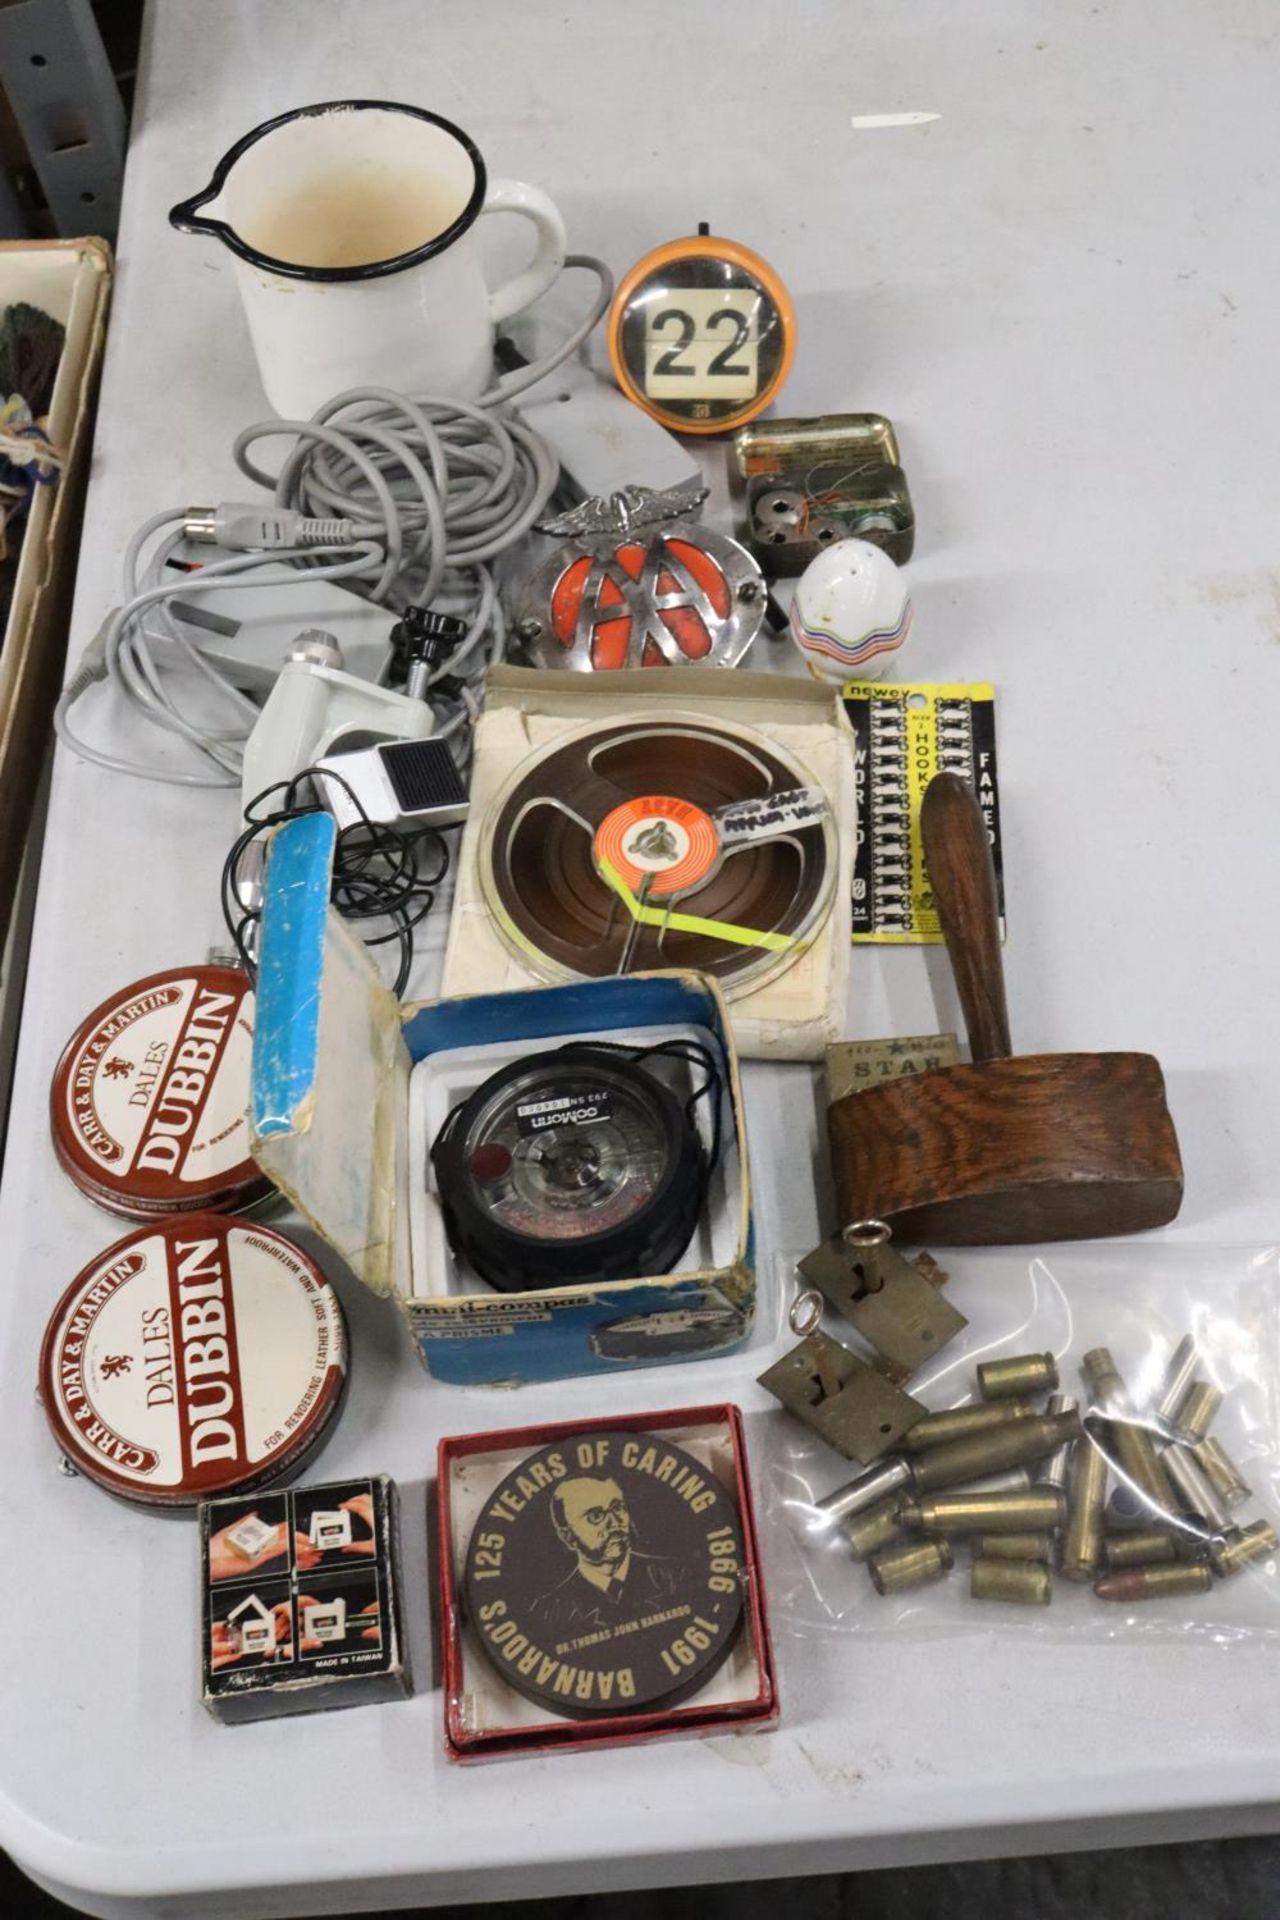 A MIXED VINTAGE LOT TO INCLUDE AN AA BADGE, DESK CALENDAR, 'MINI-COMPAS', LOCKS, GAVEL, TINS, ETC - Image 3 of 8